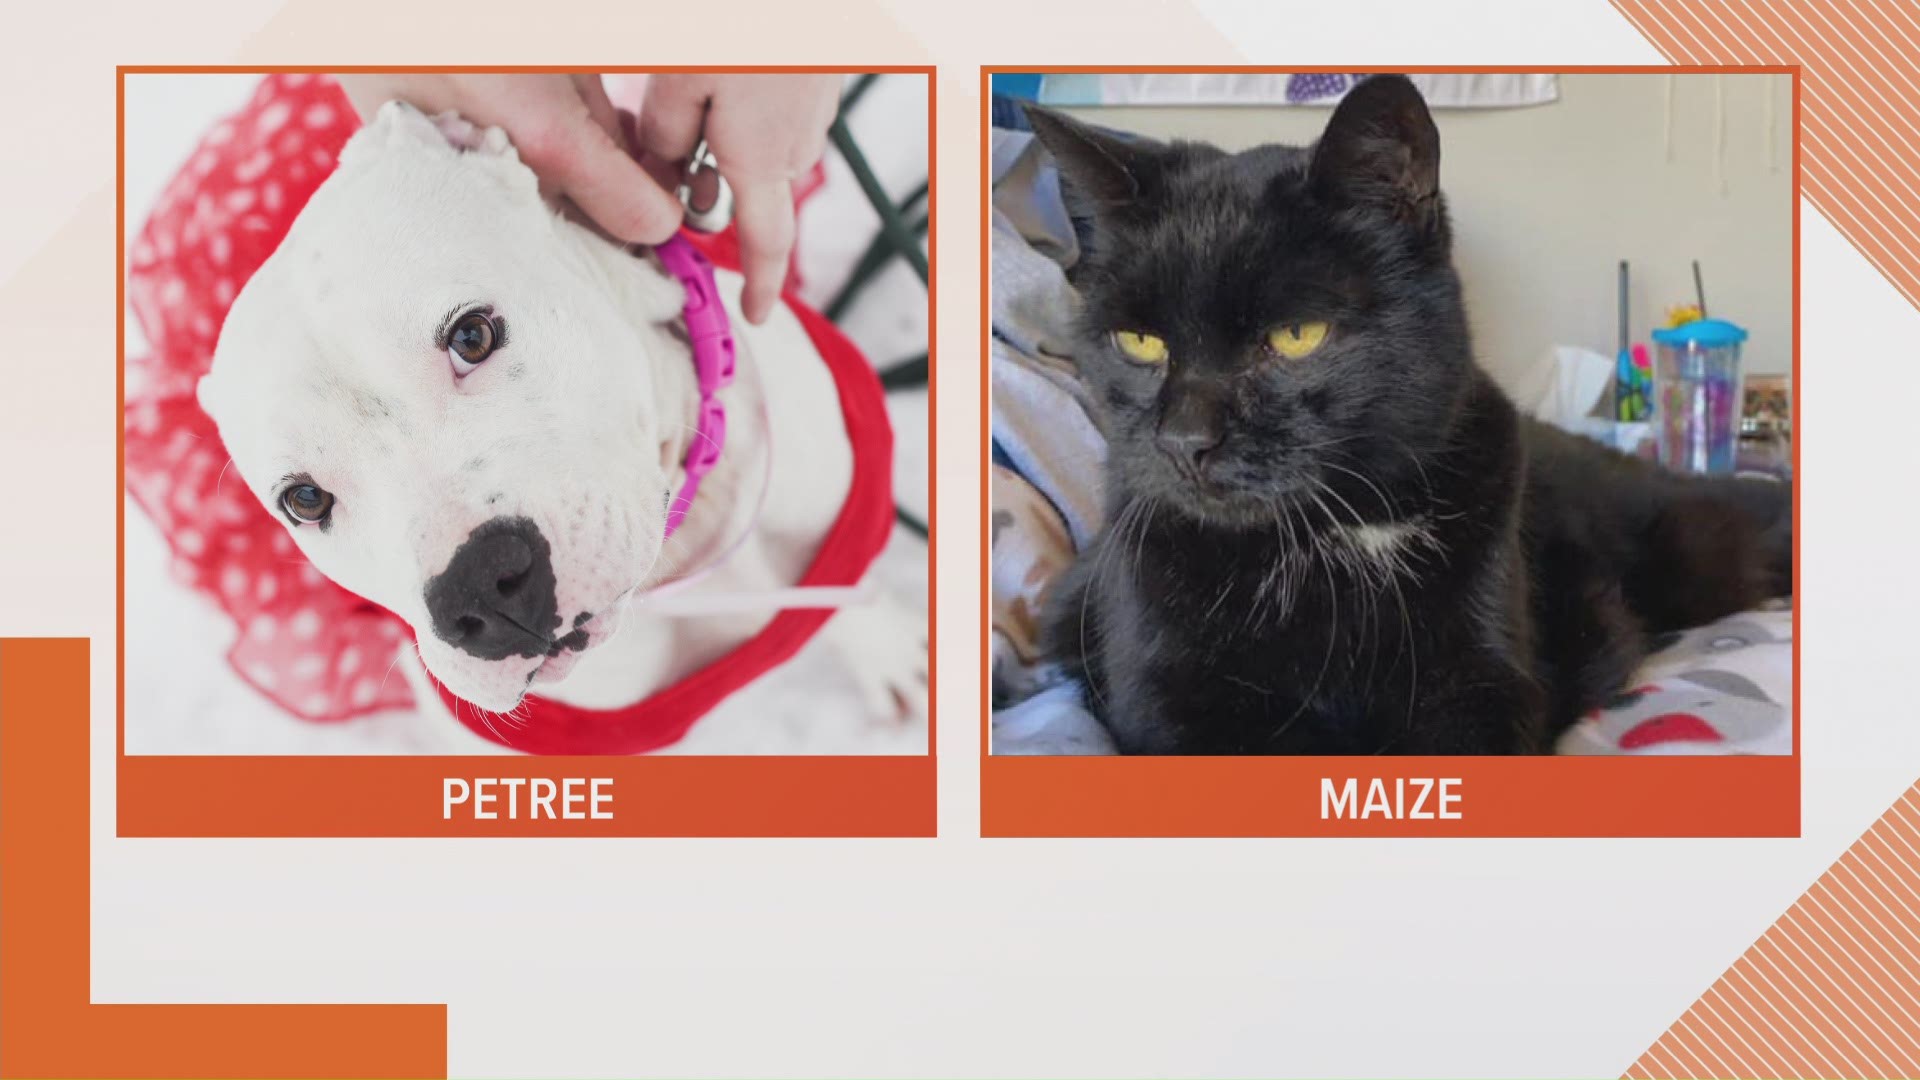 While Petree is deaf, she doesn't let that slow her down! She'd love to be the center of your world. Maize is an old soul and would love a quiet home.